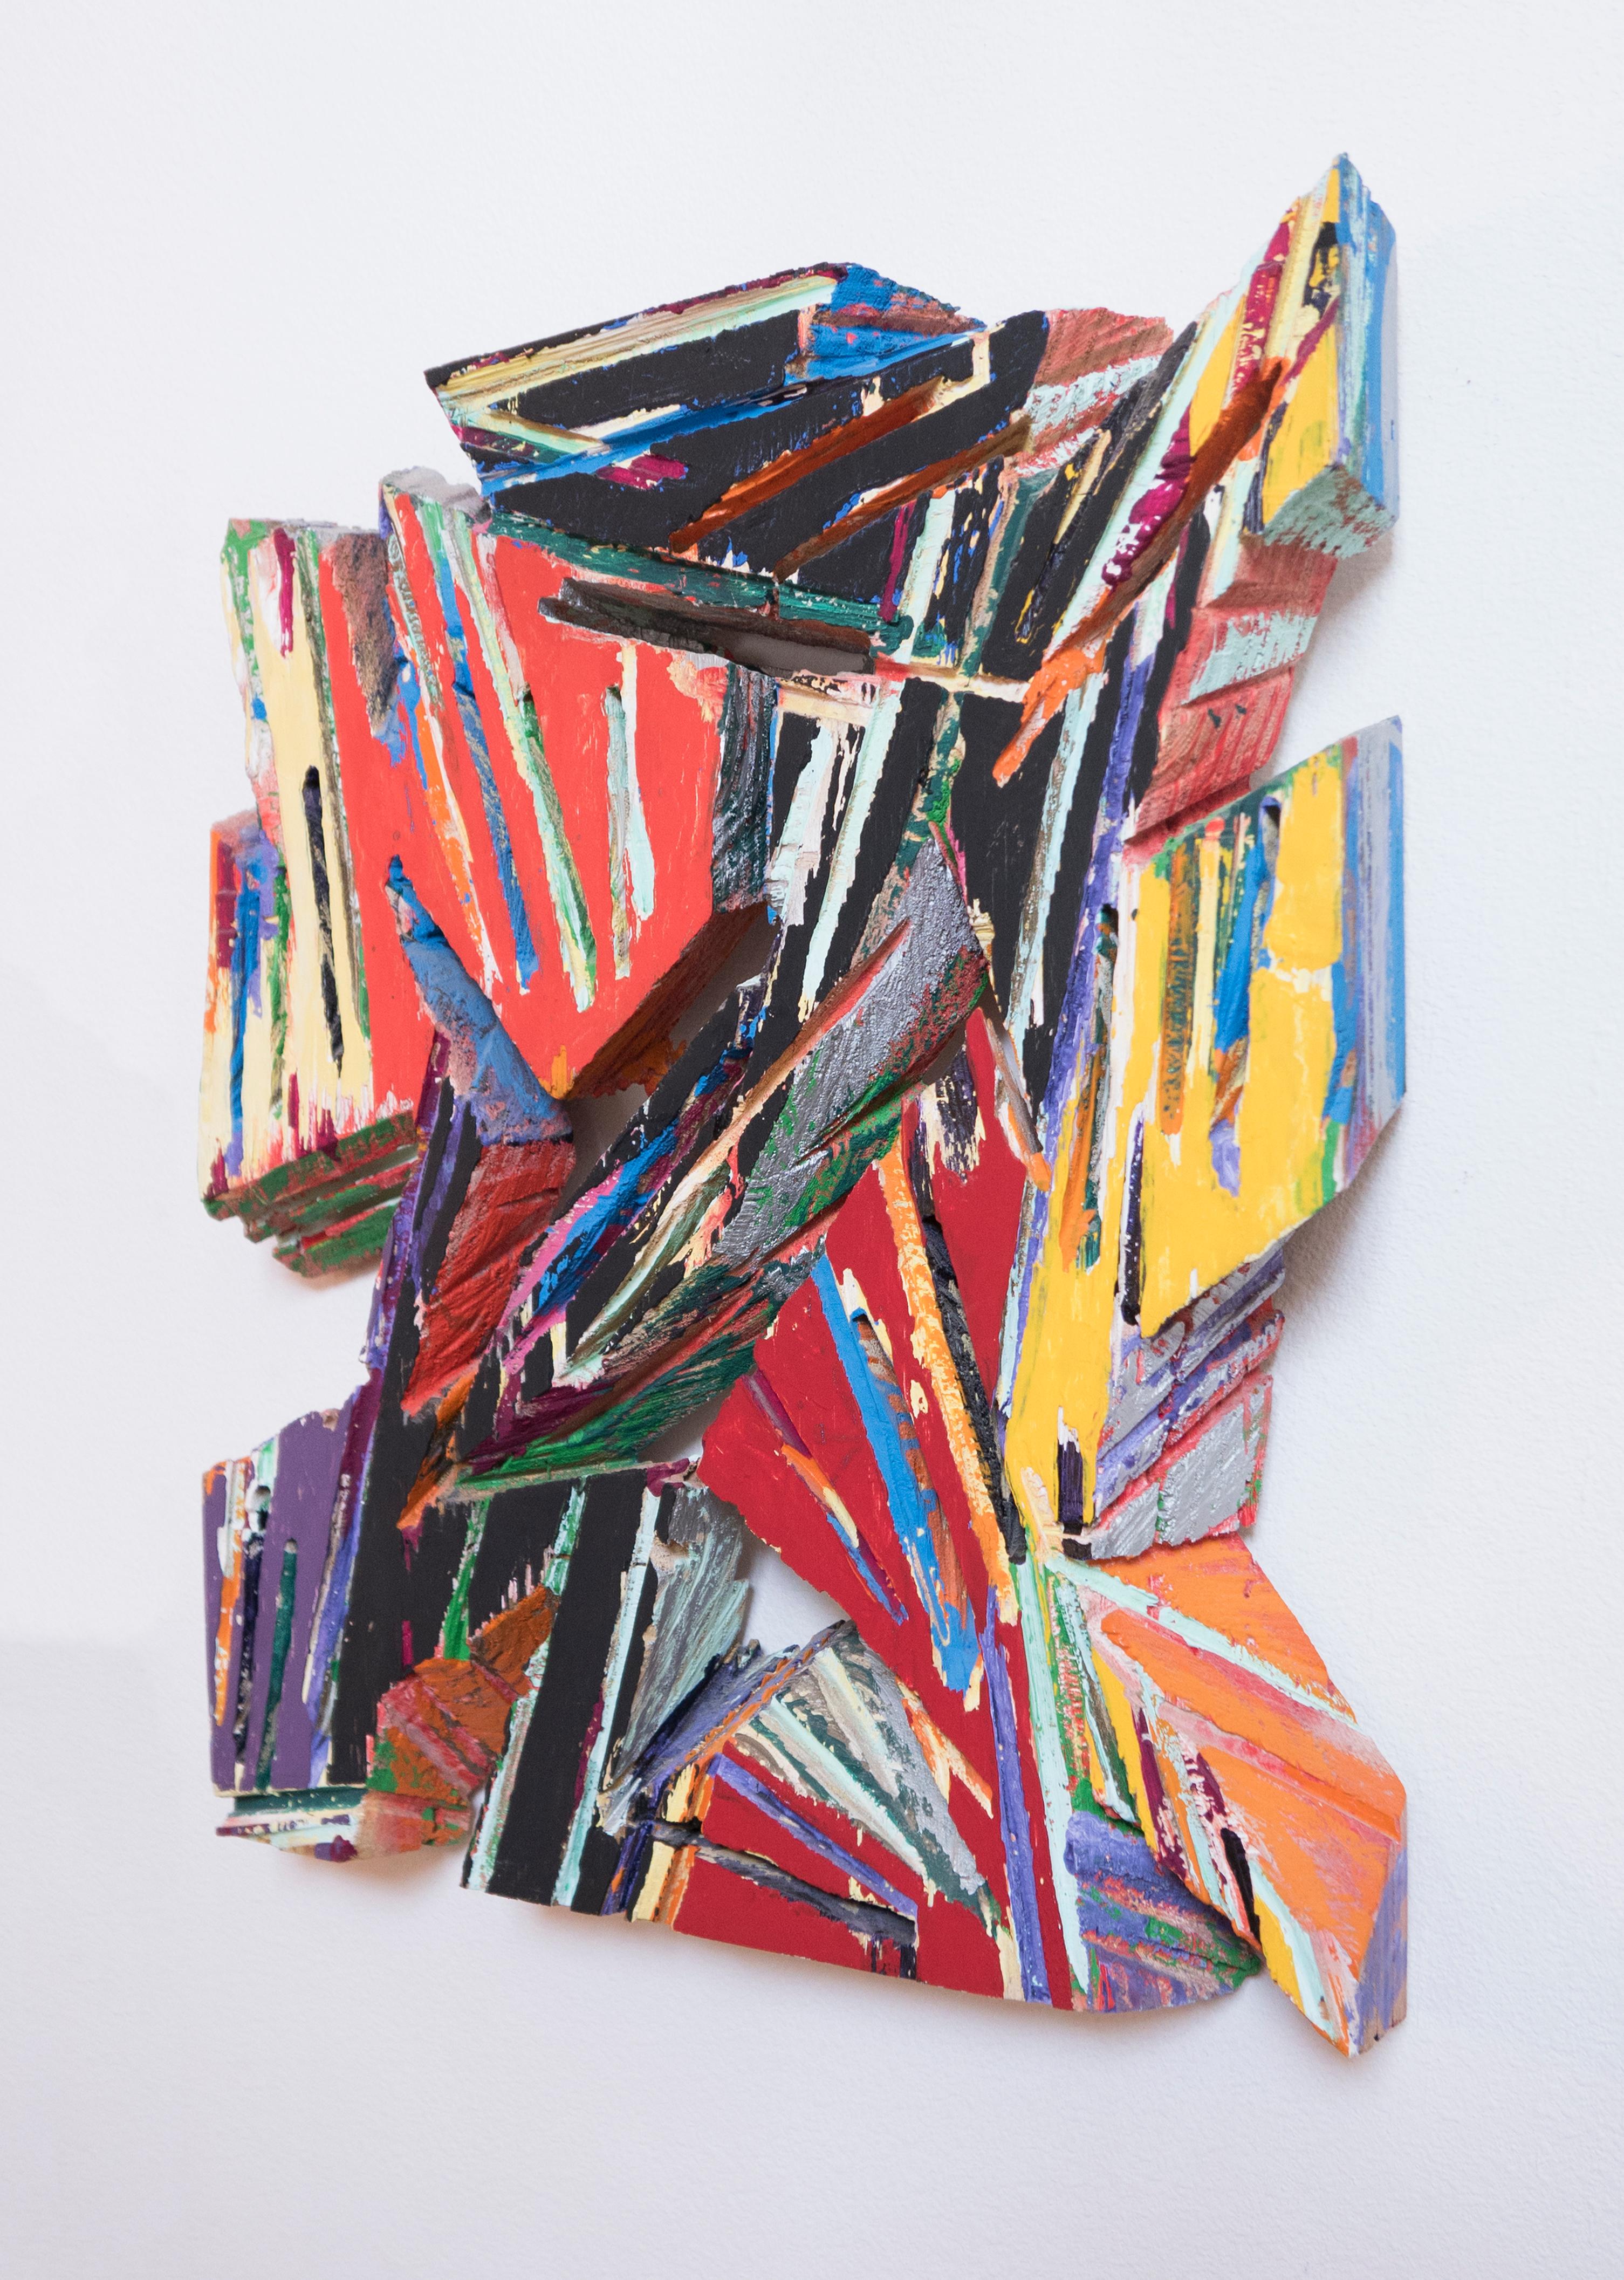 Untitled - Painting by Charles Arnoldi